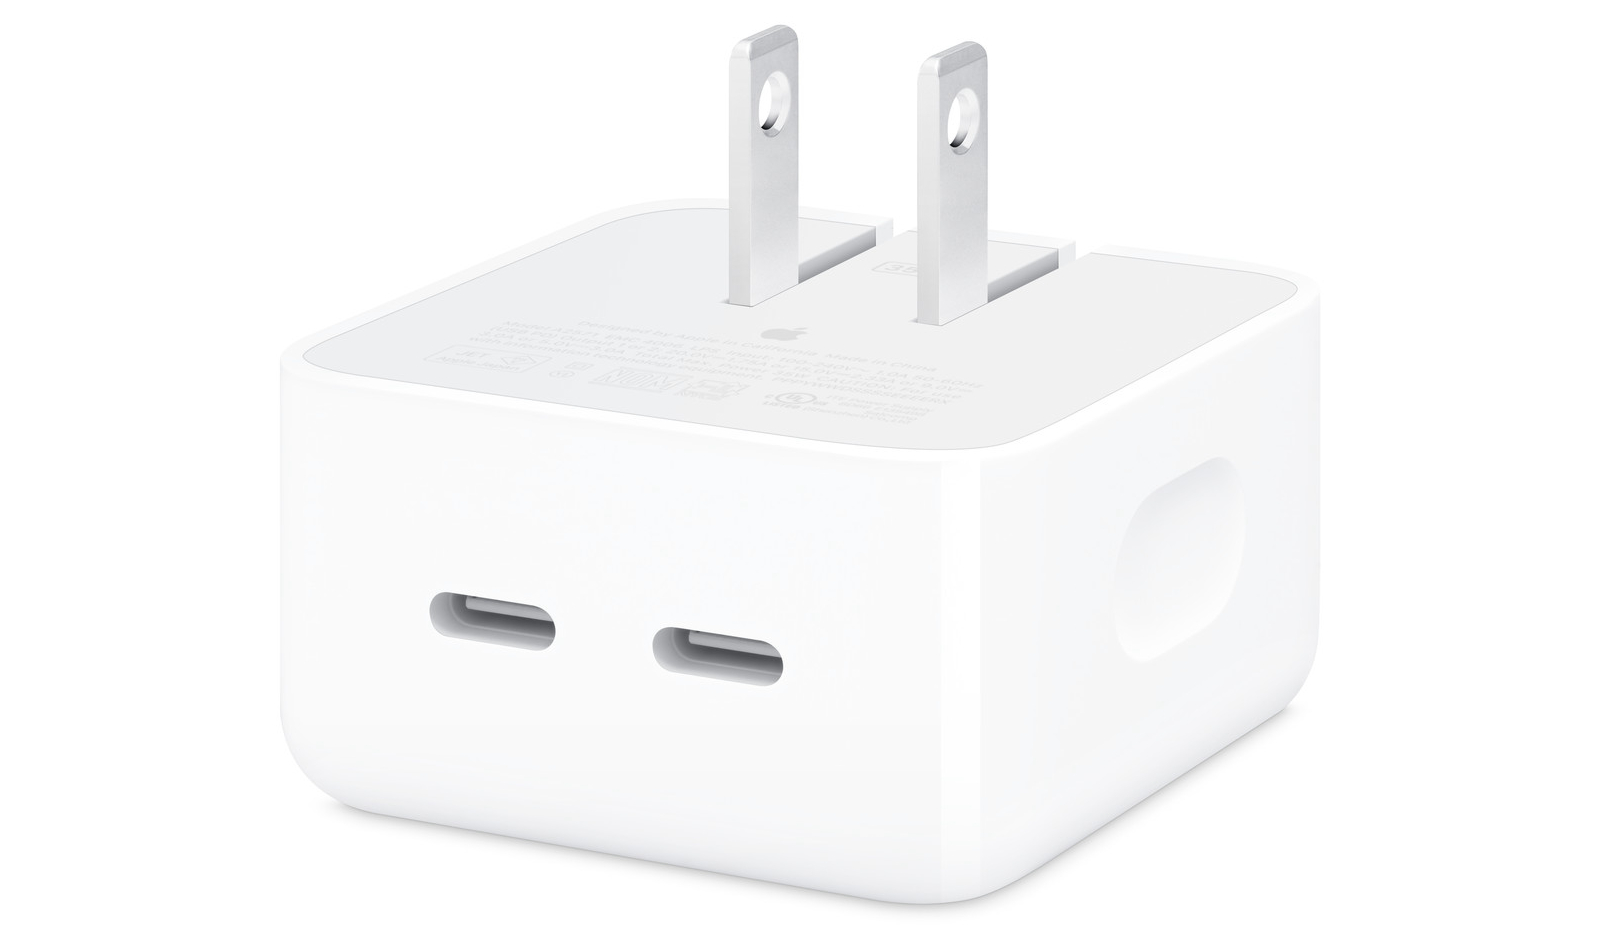 Apple’s New 35W Chargers With Dual USB-C Ports Now Available to Order